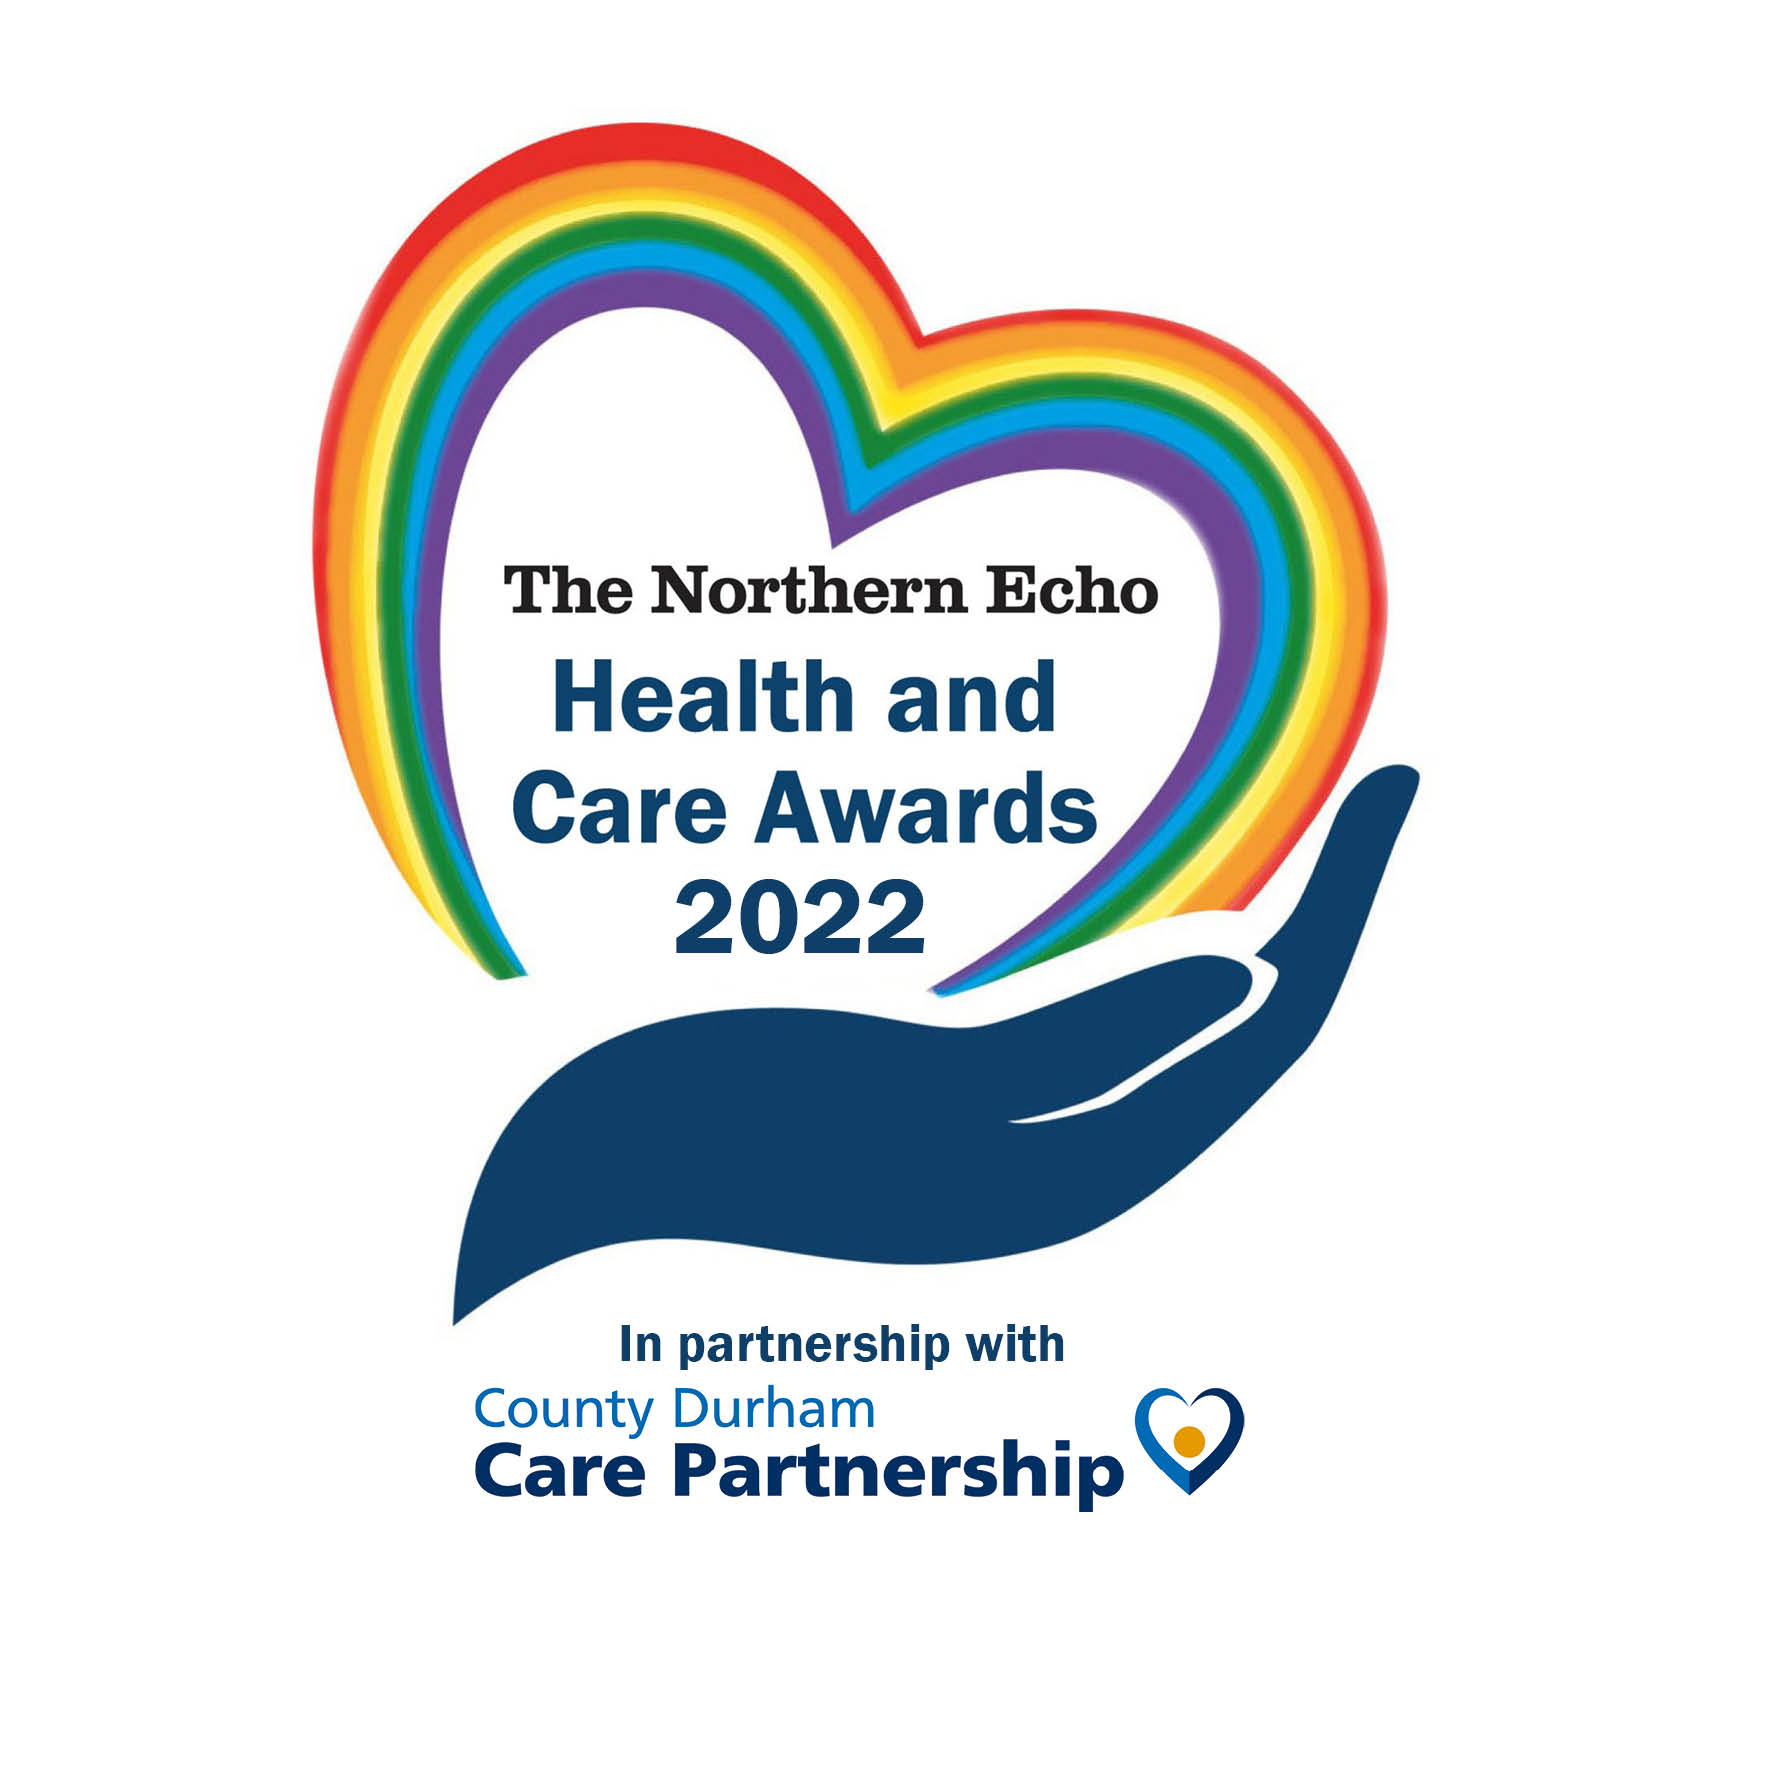 The Northern Echo: The Northern Echo Health and Care Awards 2022